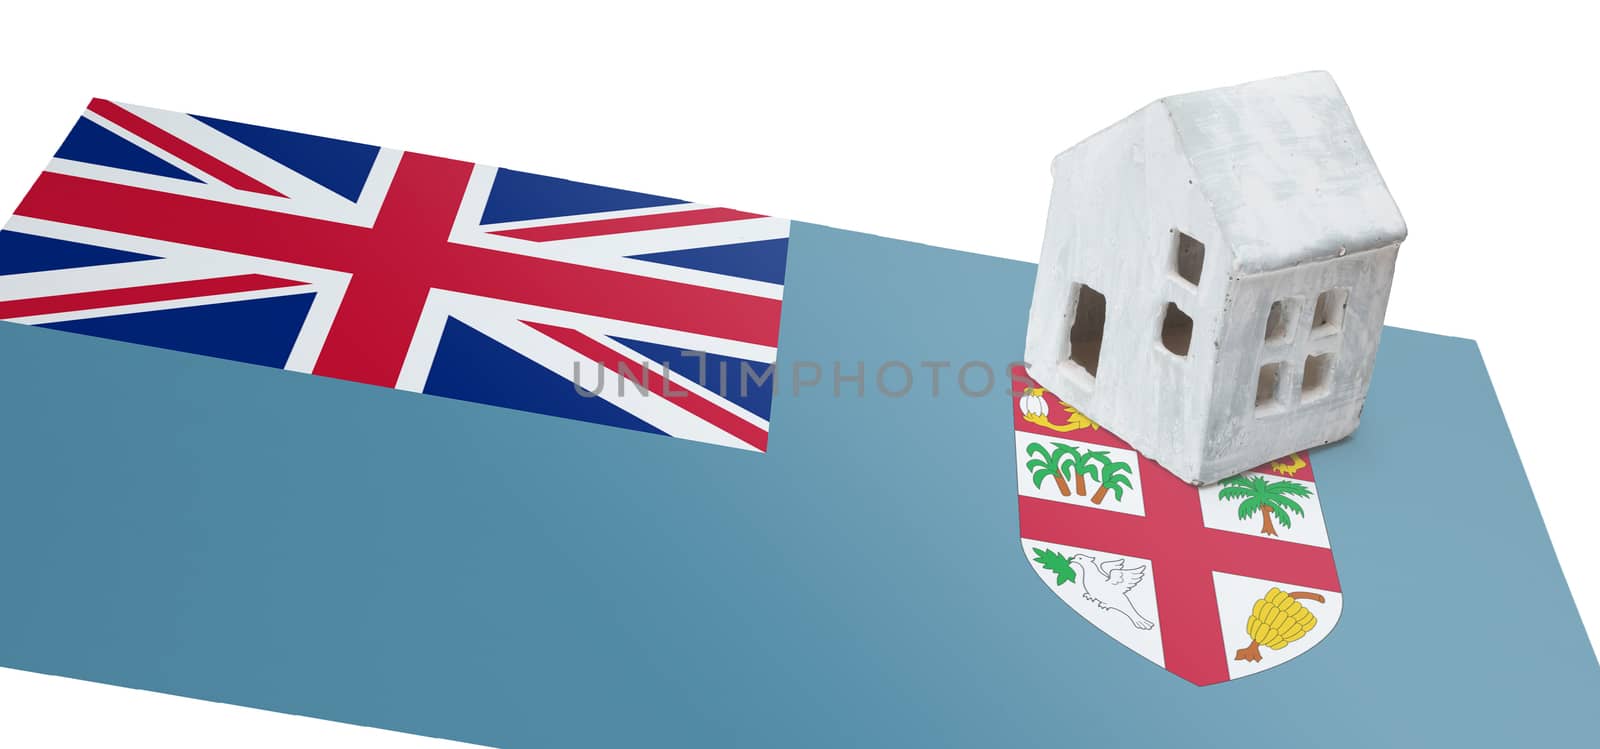 Small house on a flag - Fiji by michaklootwijk